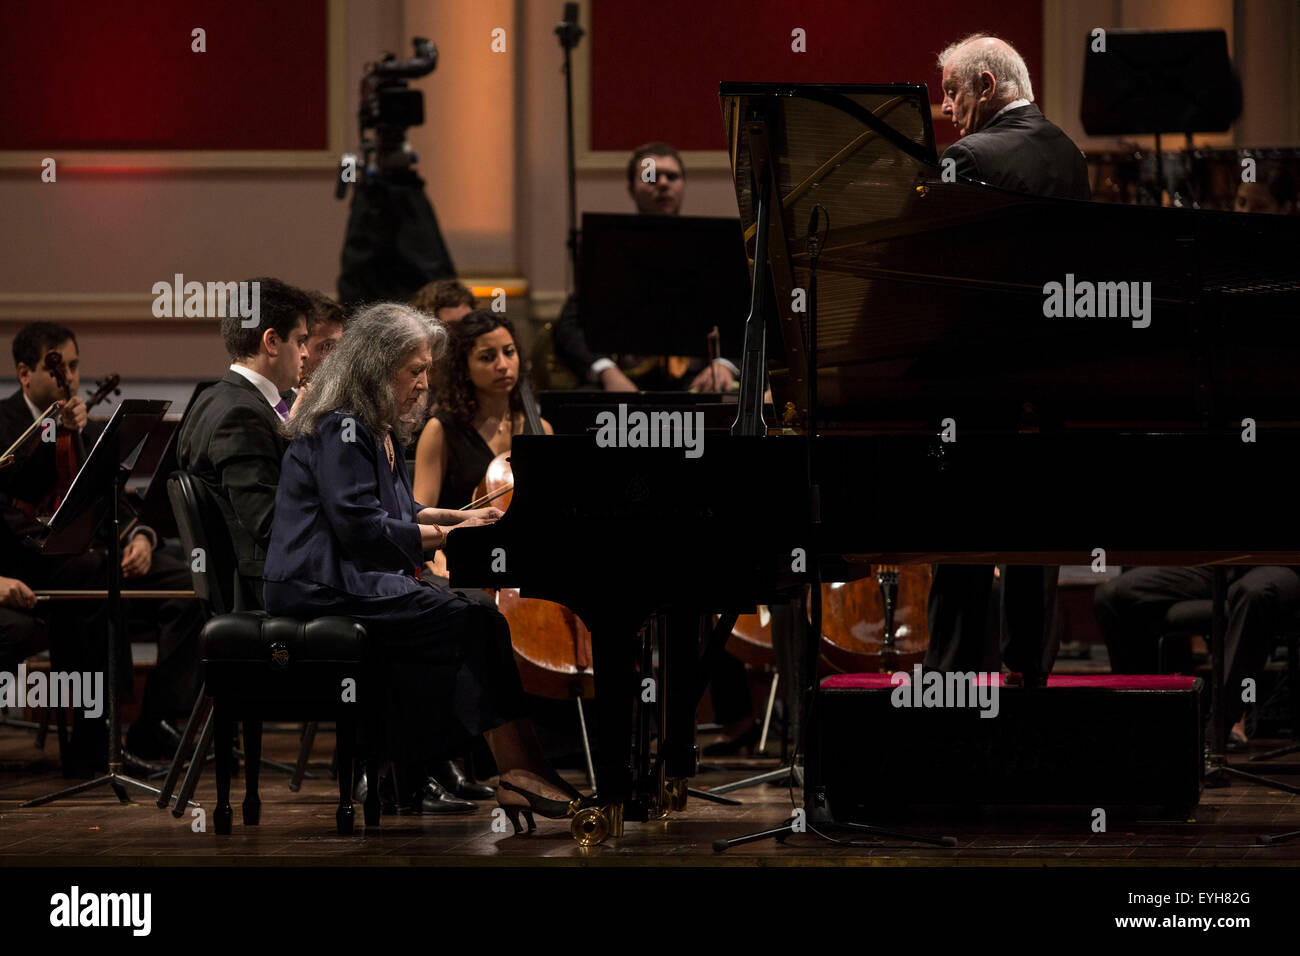 Buenos Aires, Argentina. 29th July, 2015. Argentinean musician and orchestra conductor Daniel Barenboim (R) and pianist Martha Argerich perform at a concert held with the West-Eastern Divan Orchestra at the Colon Theater, in Buenos Aires, capital of Argentina, July 29, 2015. © Martin Zabala/Xinhua/Alamy Live News Stock Photo